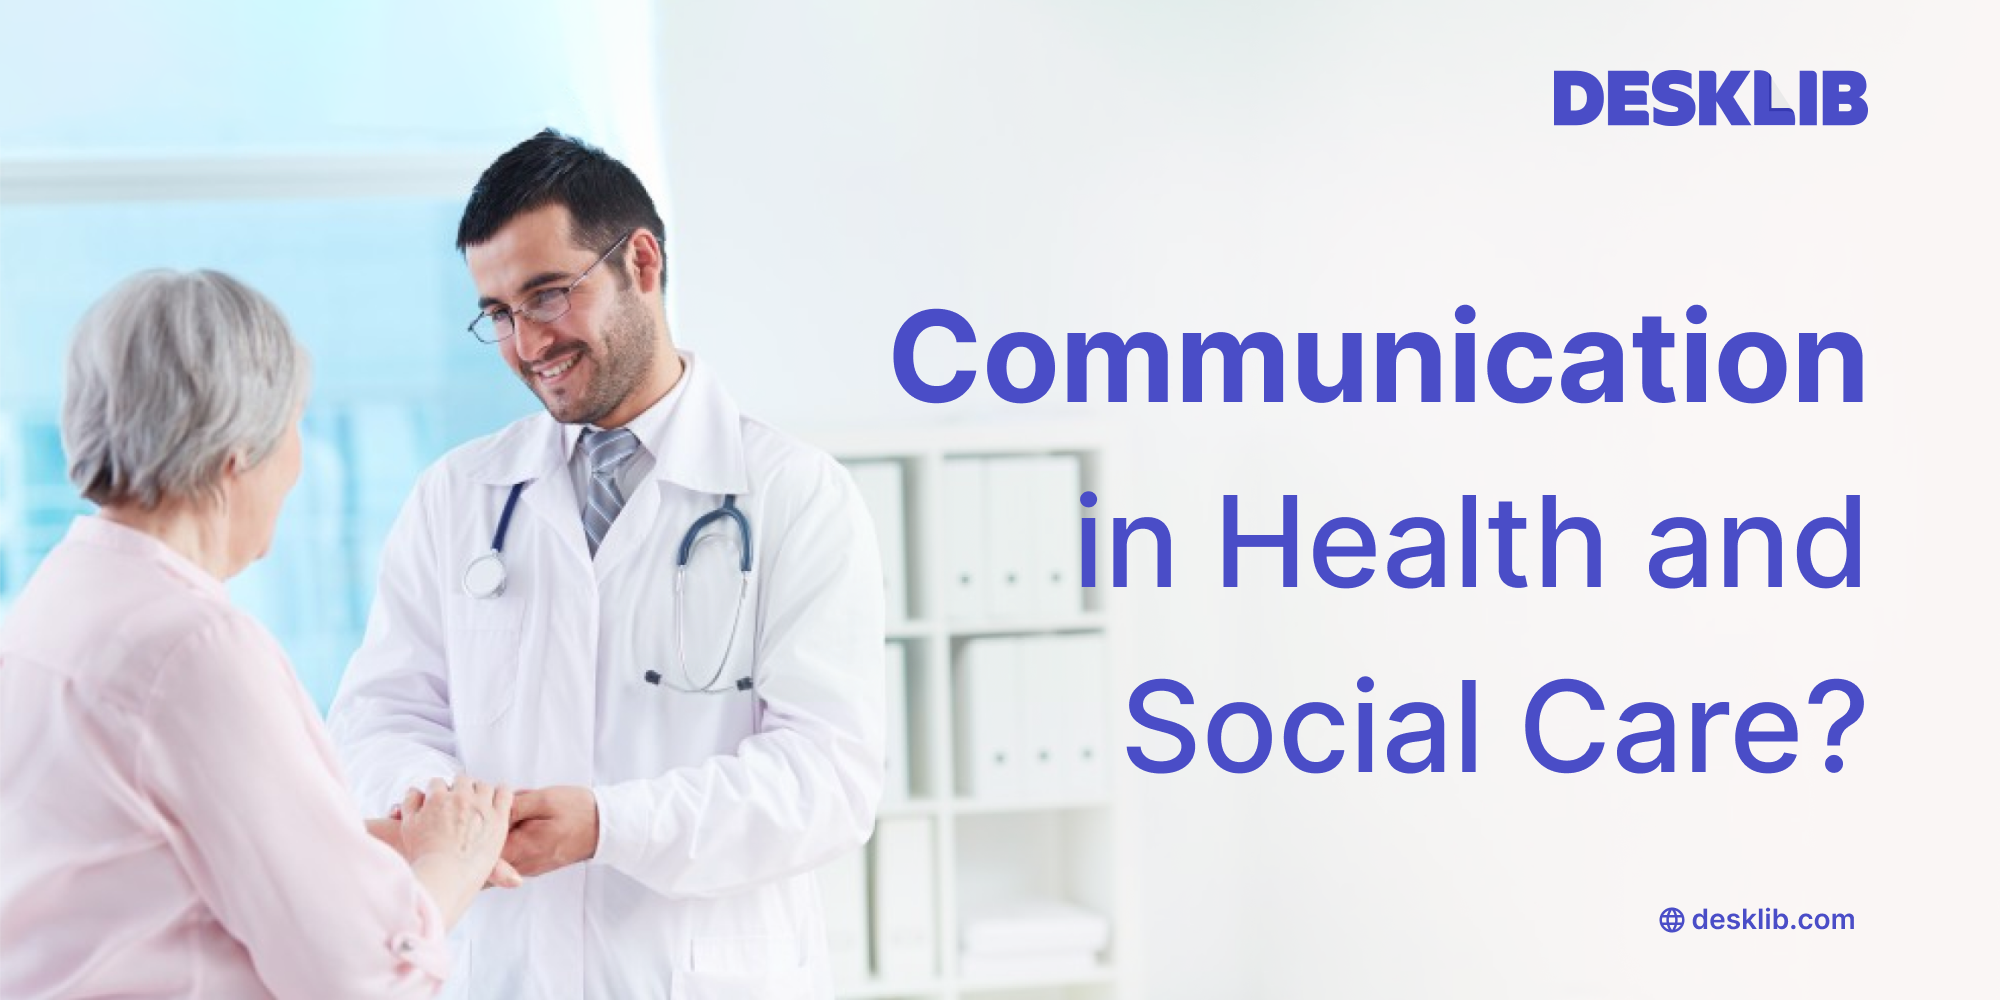 Why is Communication Important in Health and Social Care?